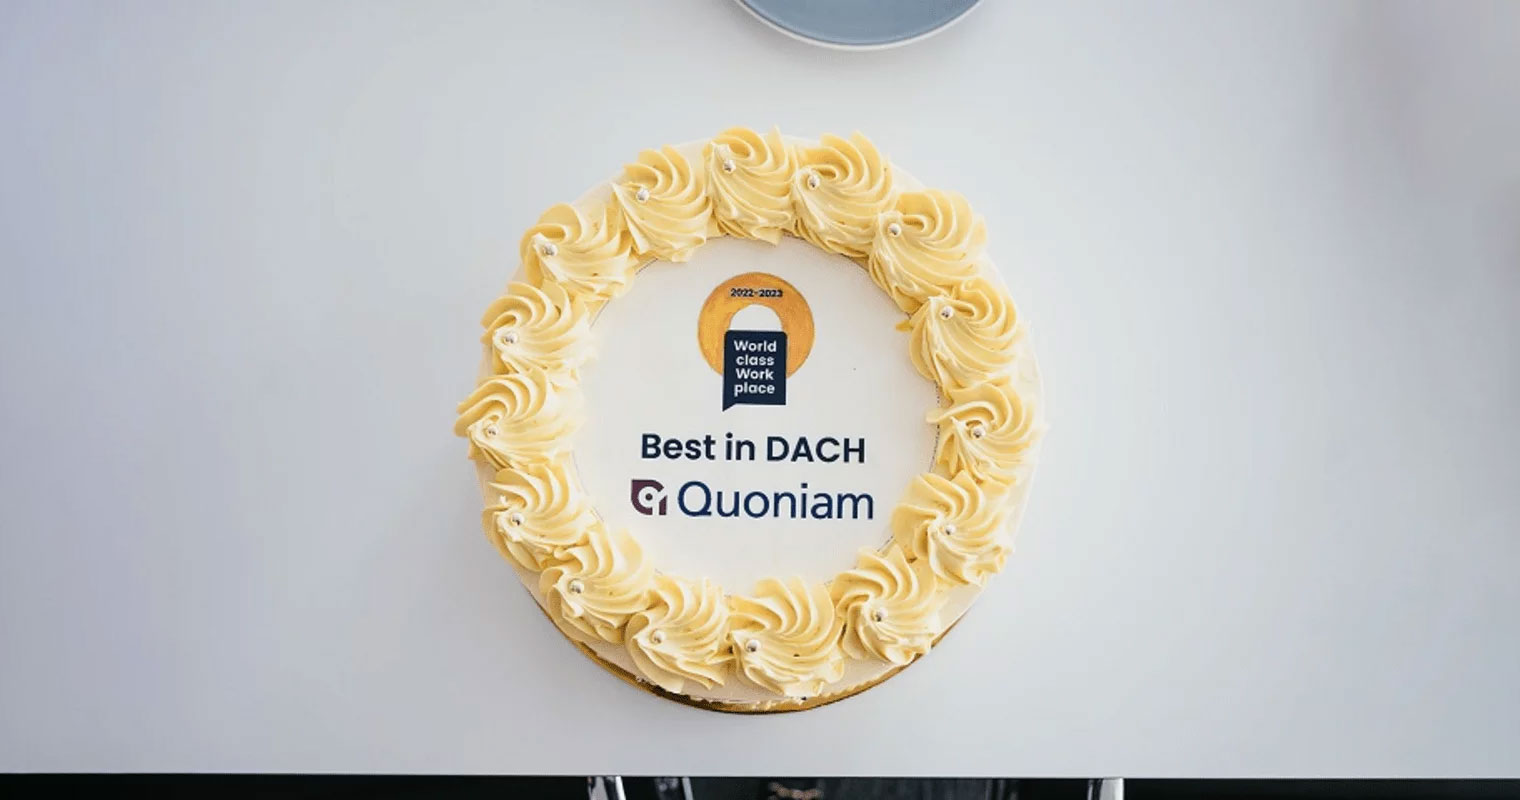 Employee Engagement Success Story of Quoniam: World-class Workplace Winner of Best in DACH